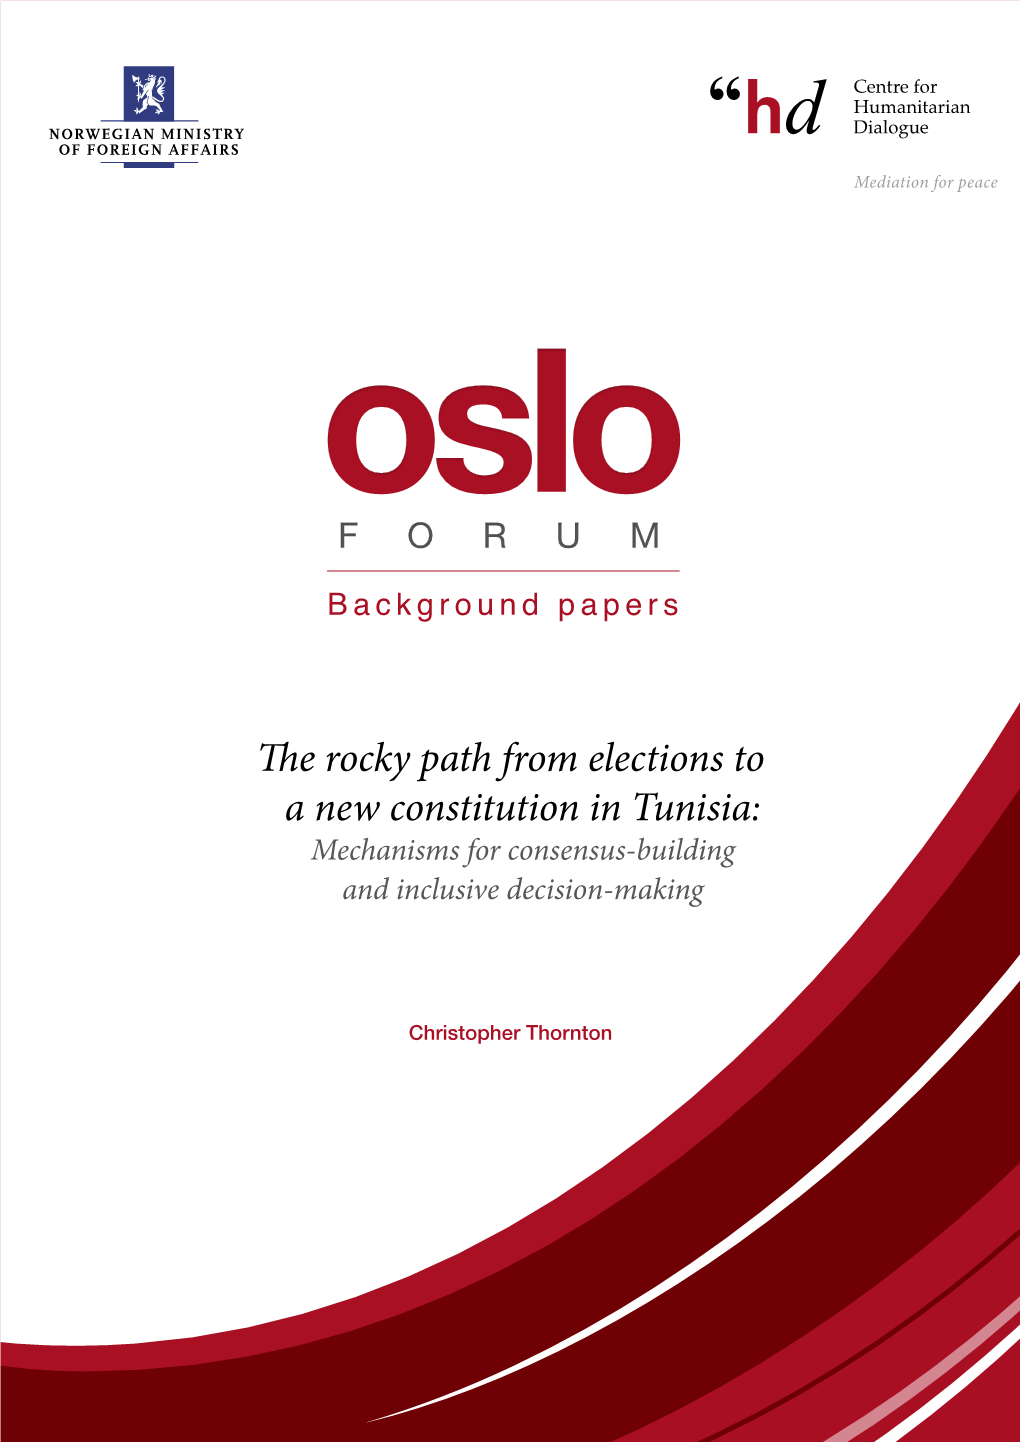 The Rocky Path from Elections to a New Constitution in Tunisia: Mechanisms for Consensus-Building and Inclusive Decision-Making